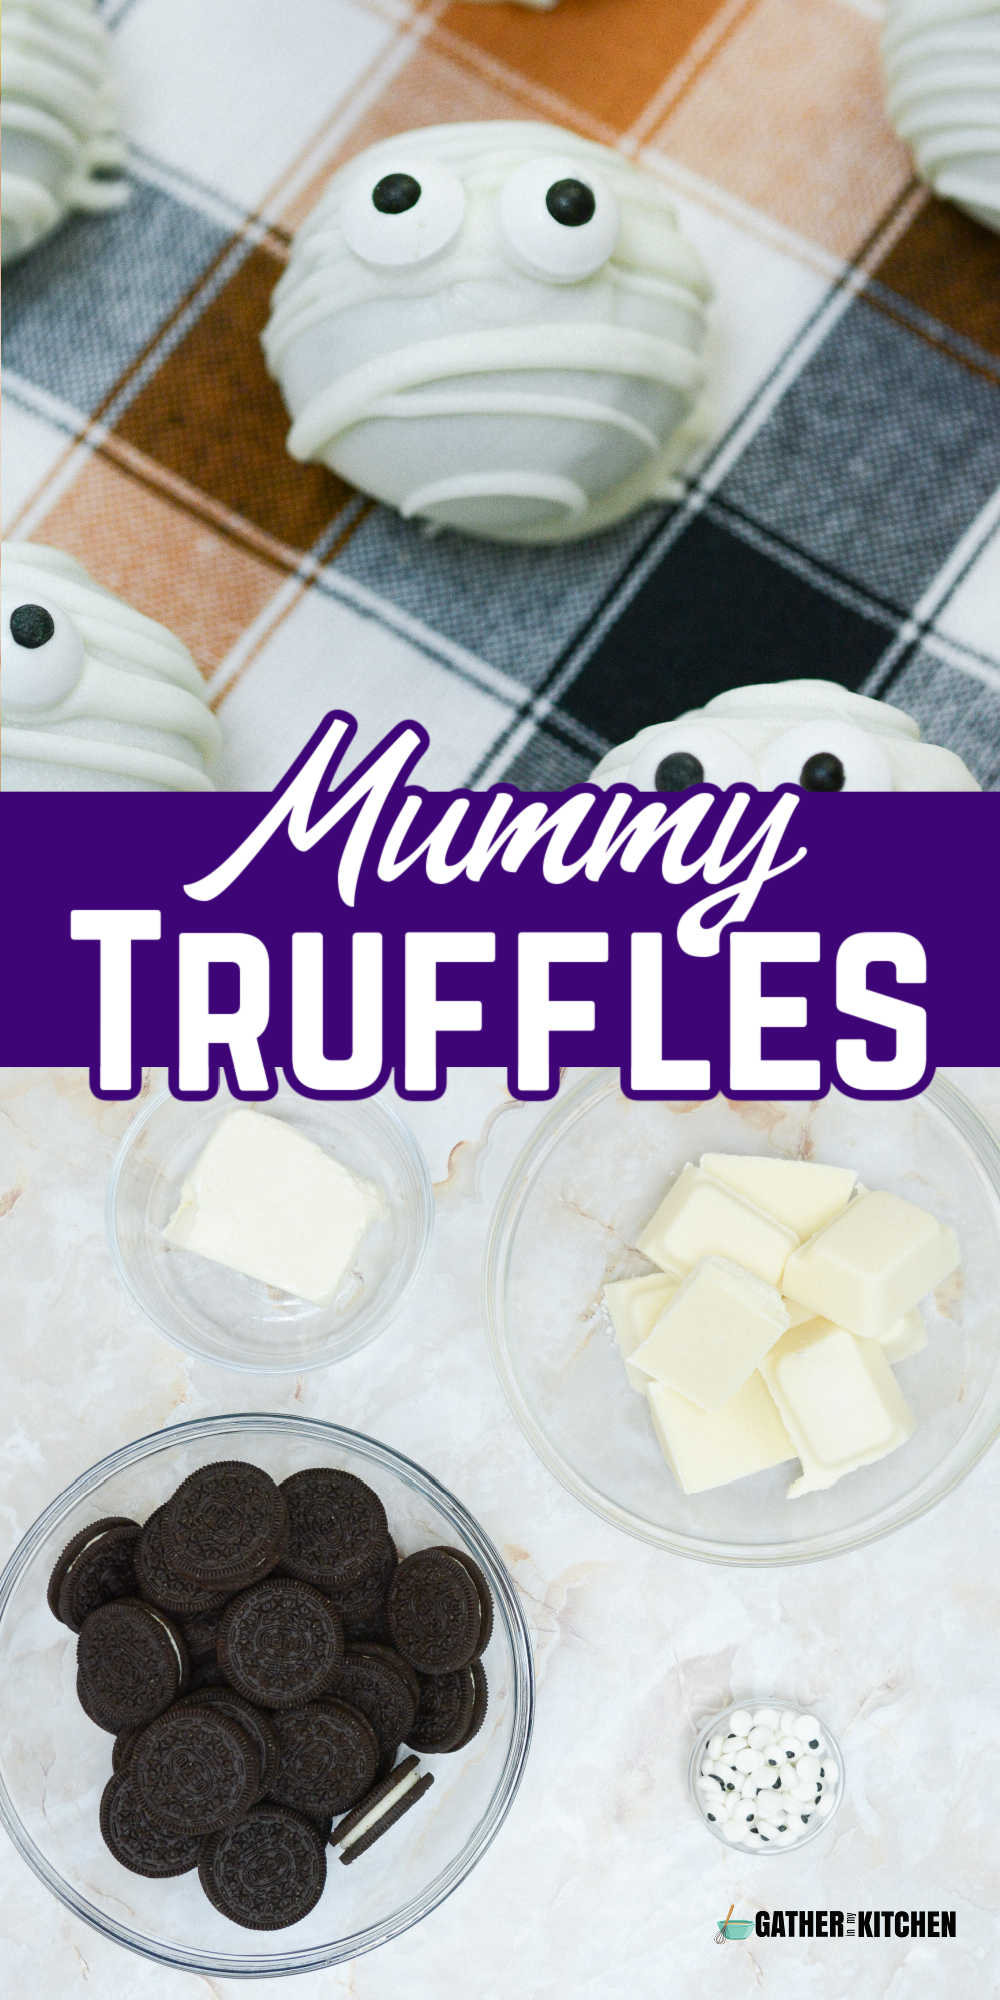 pin image: top is mummy truffles laid out on a table, middle says "Mummy Truffle" and bottom shows ingredients of mummy truffle